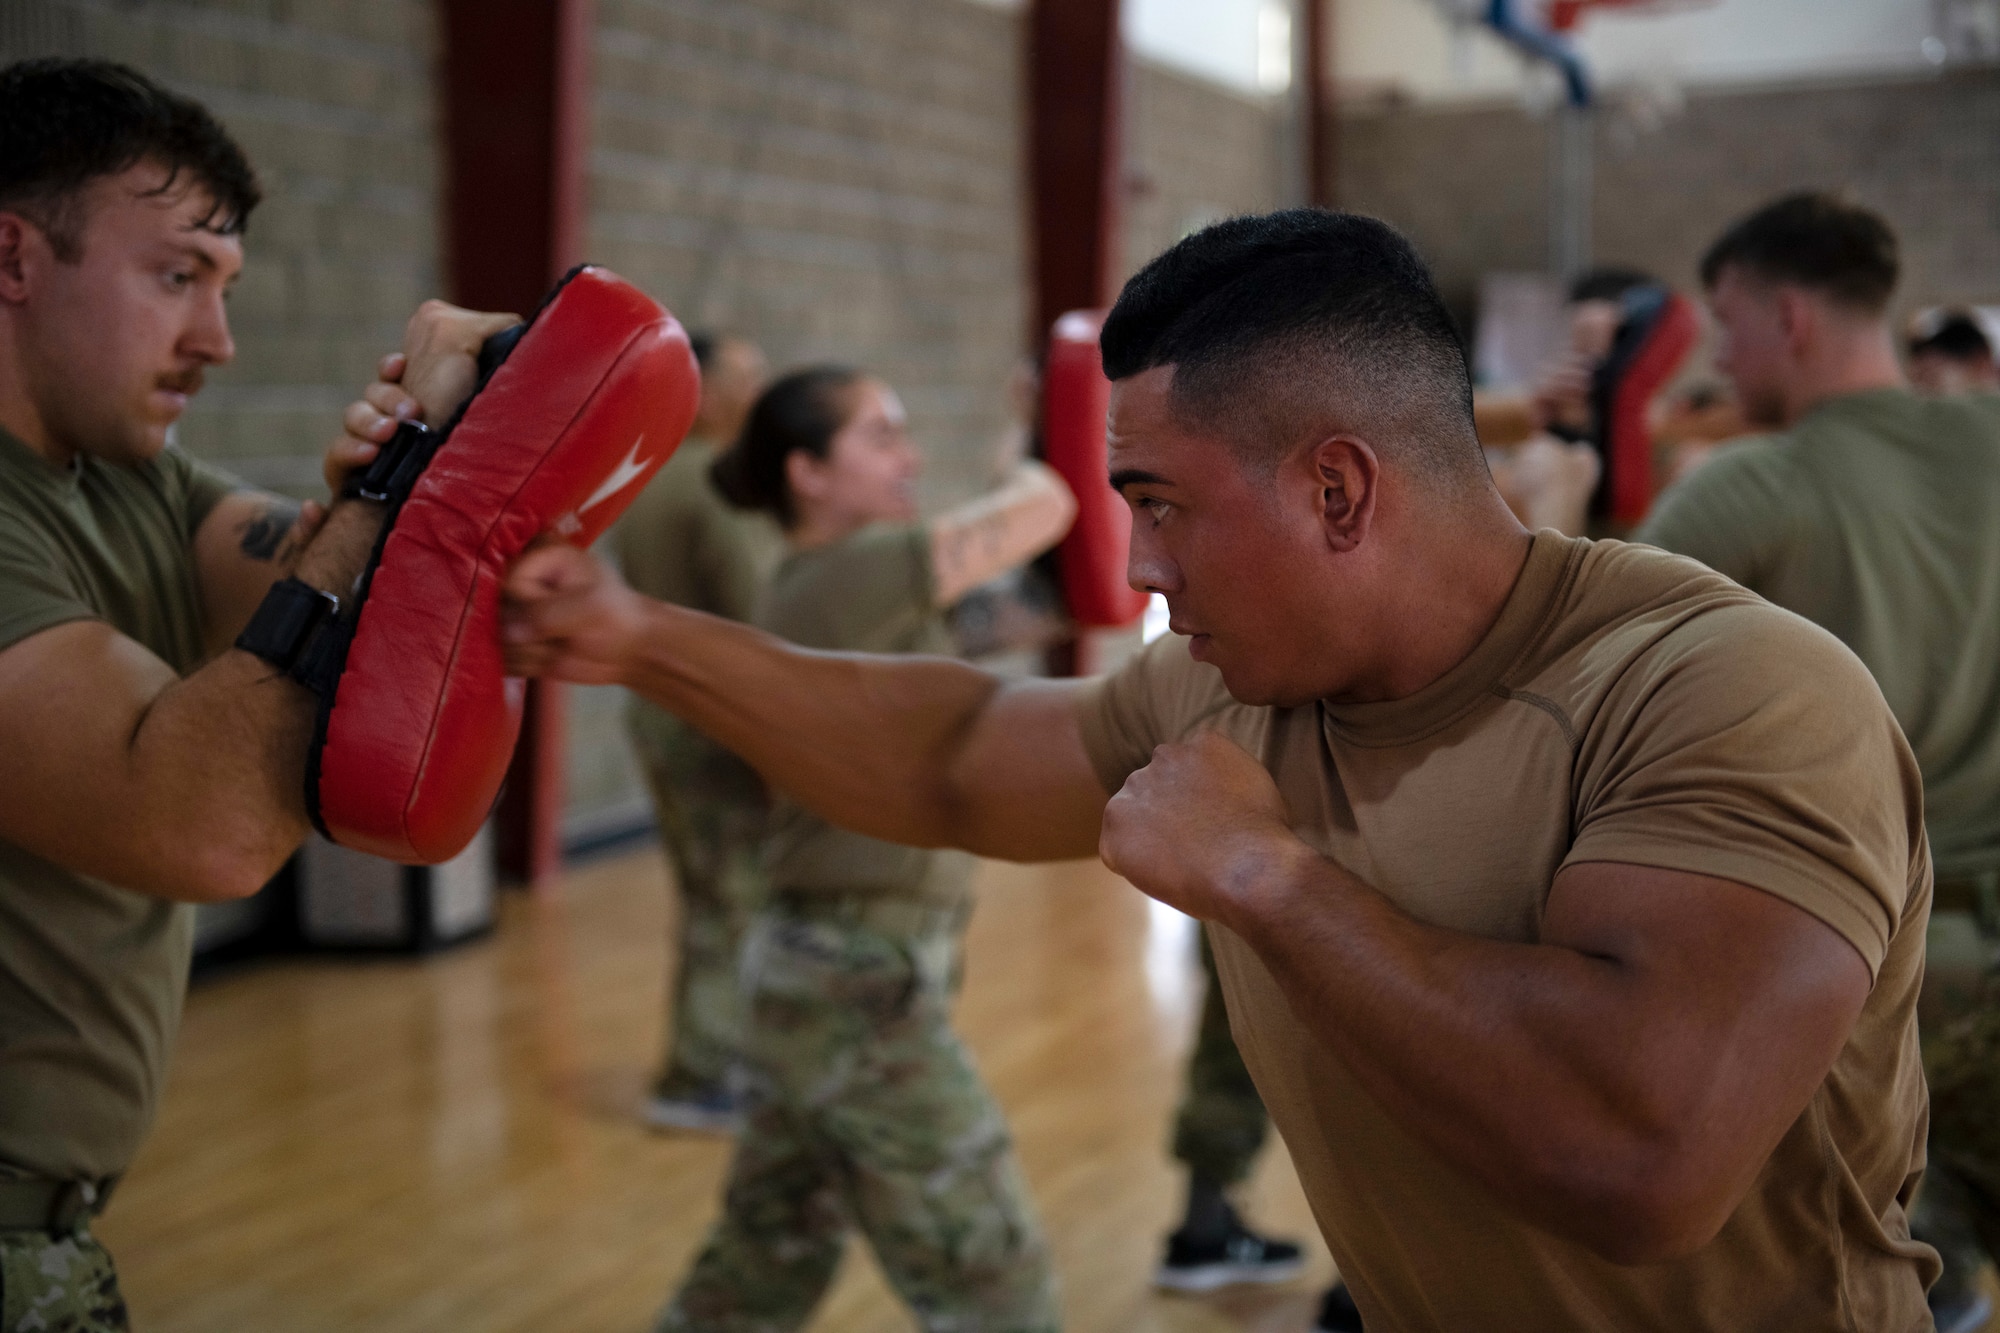 Airmen punch pads during martial arts training.